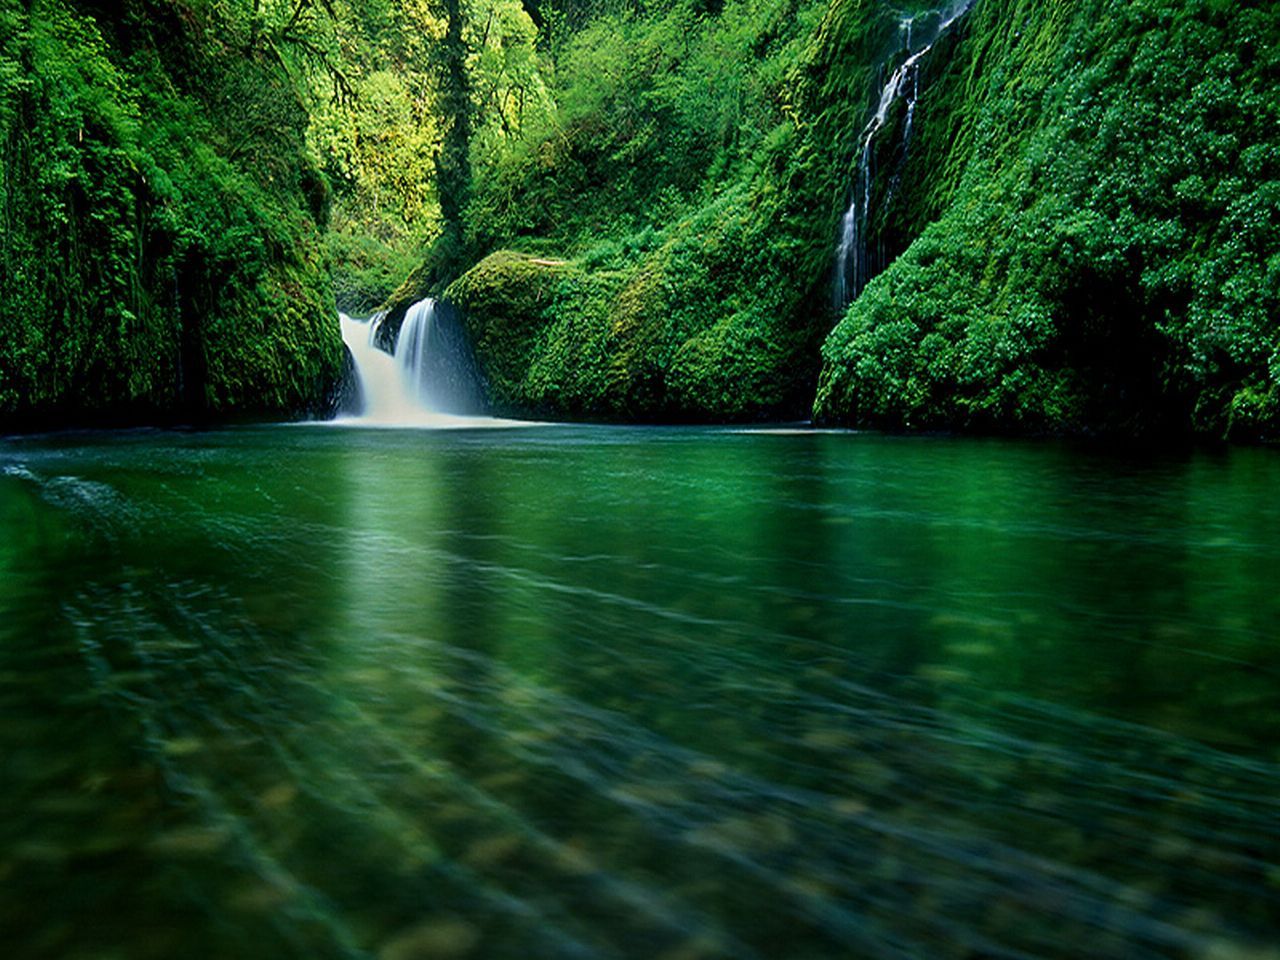 Android Wallpaper 640 480 Dailymobile023. Waterfall, Waterfall Wallpaper, Forest Waterfall